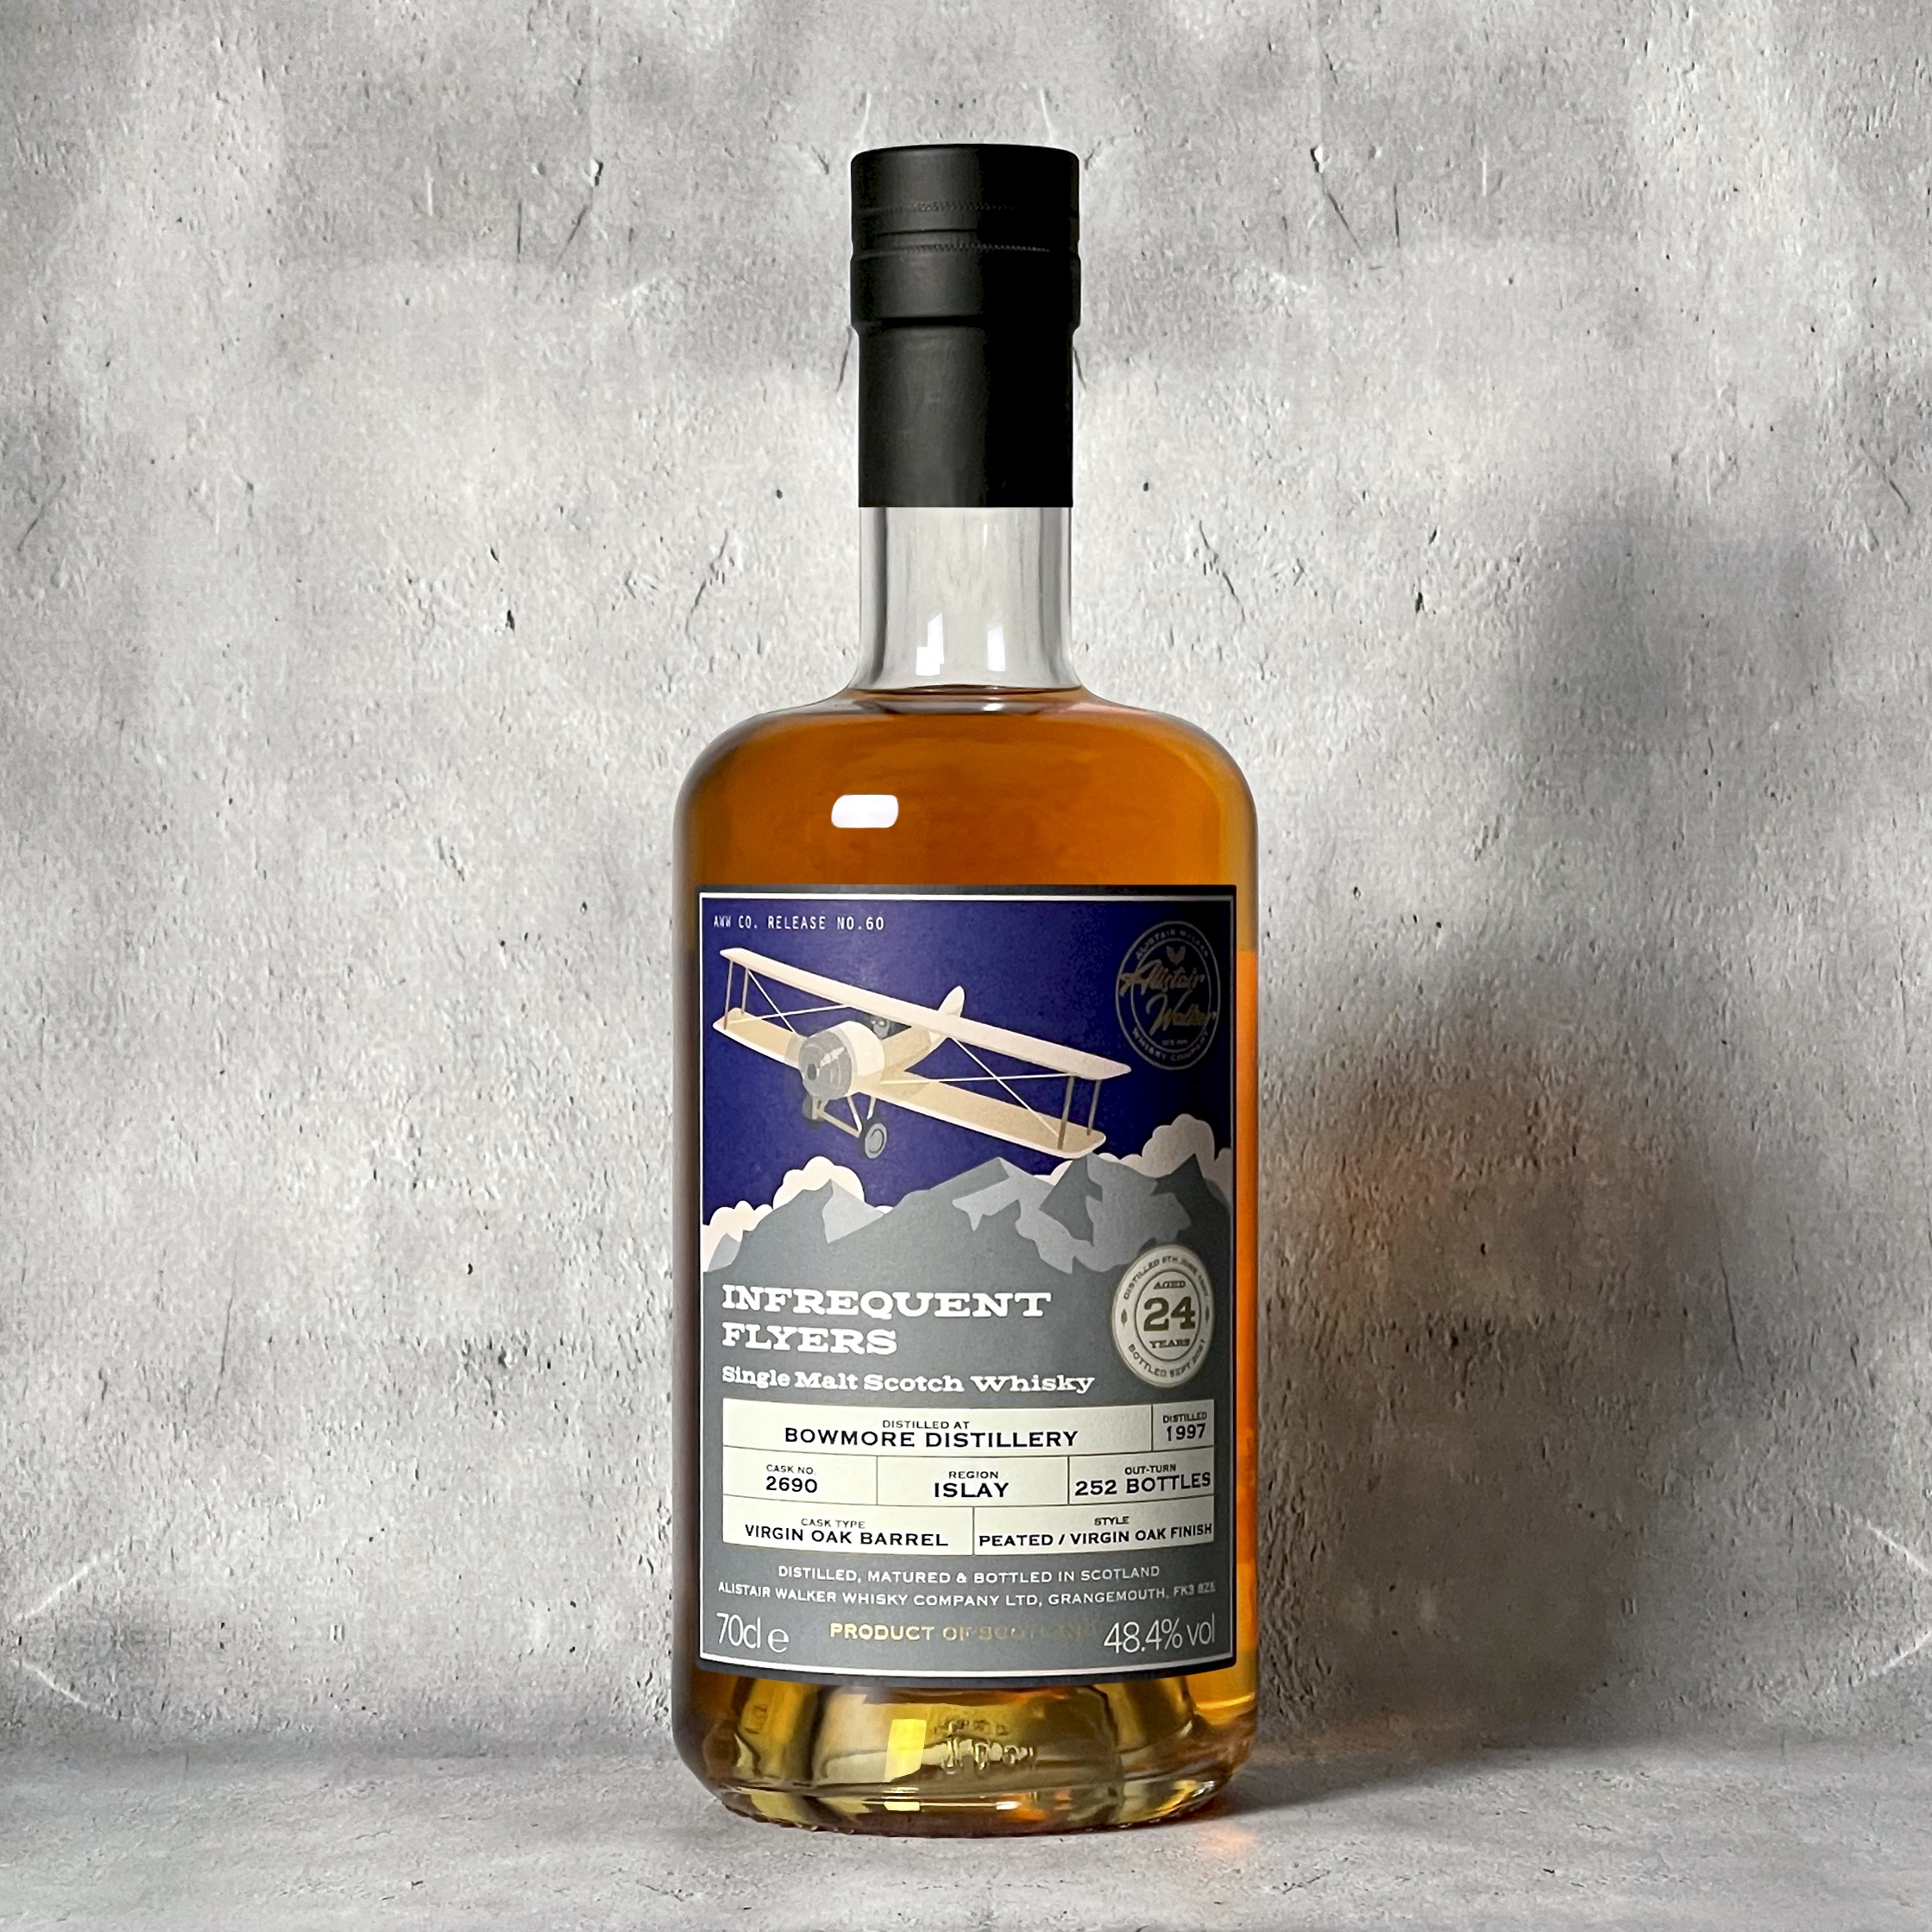 WHISKY LOVERS ONLINESHOP / ボウモア 1997 24年 ヴァージンオーク